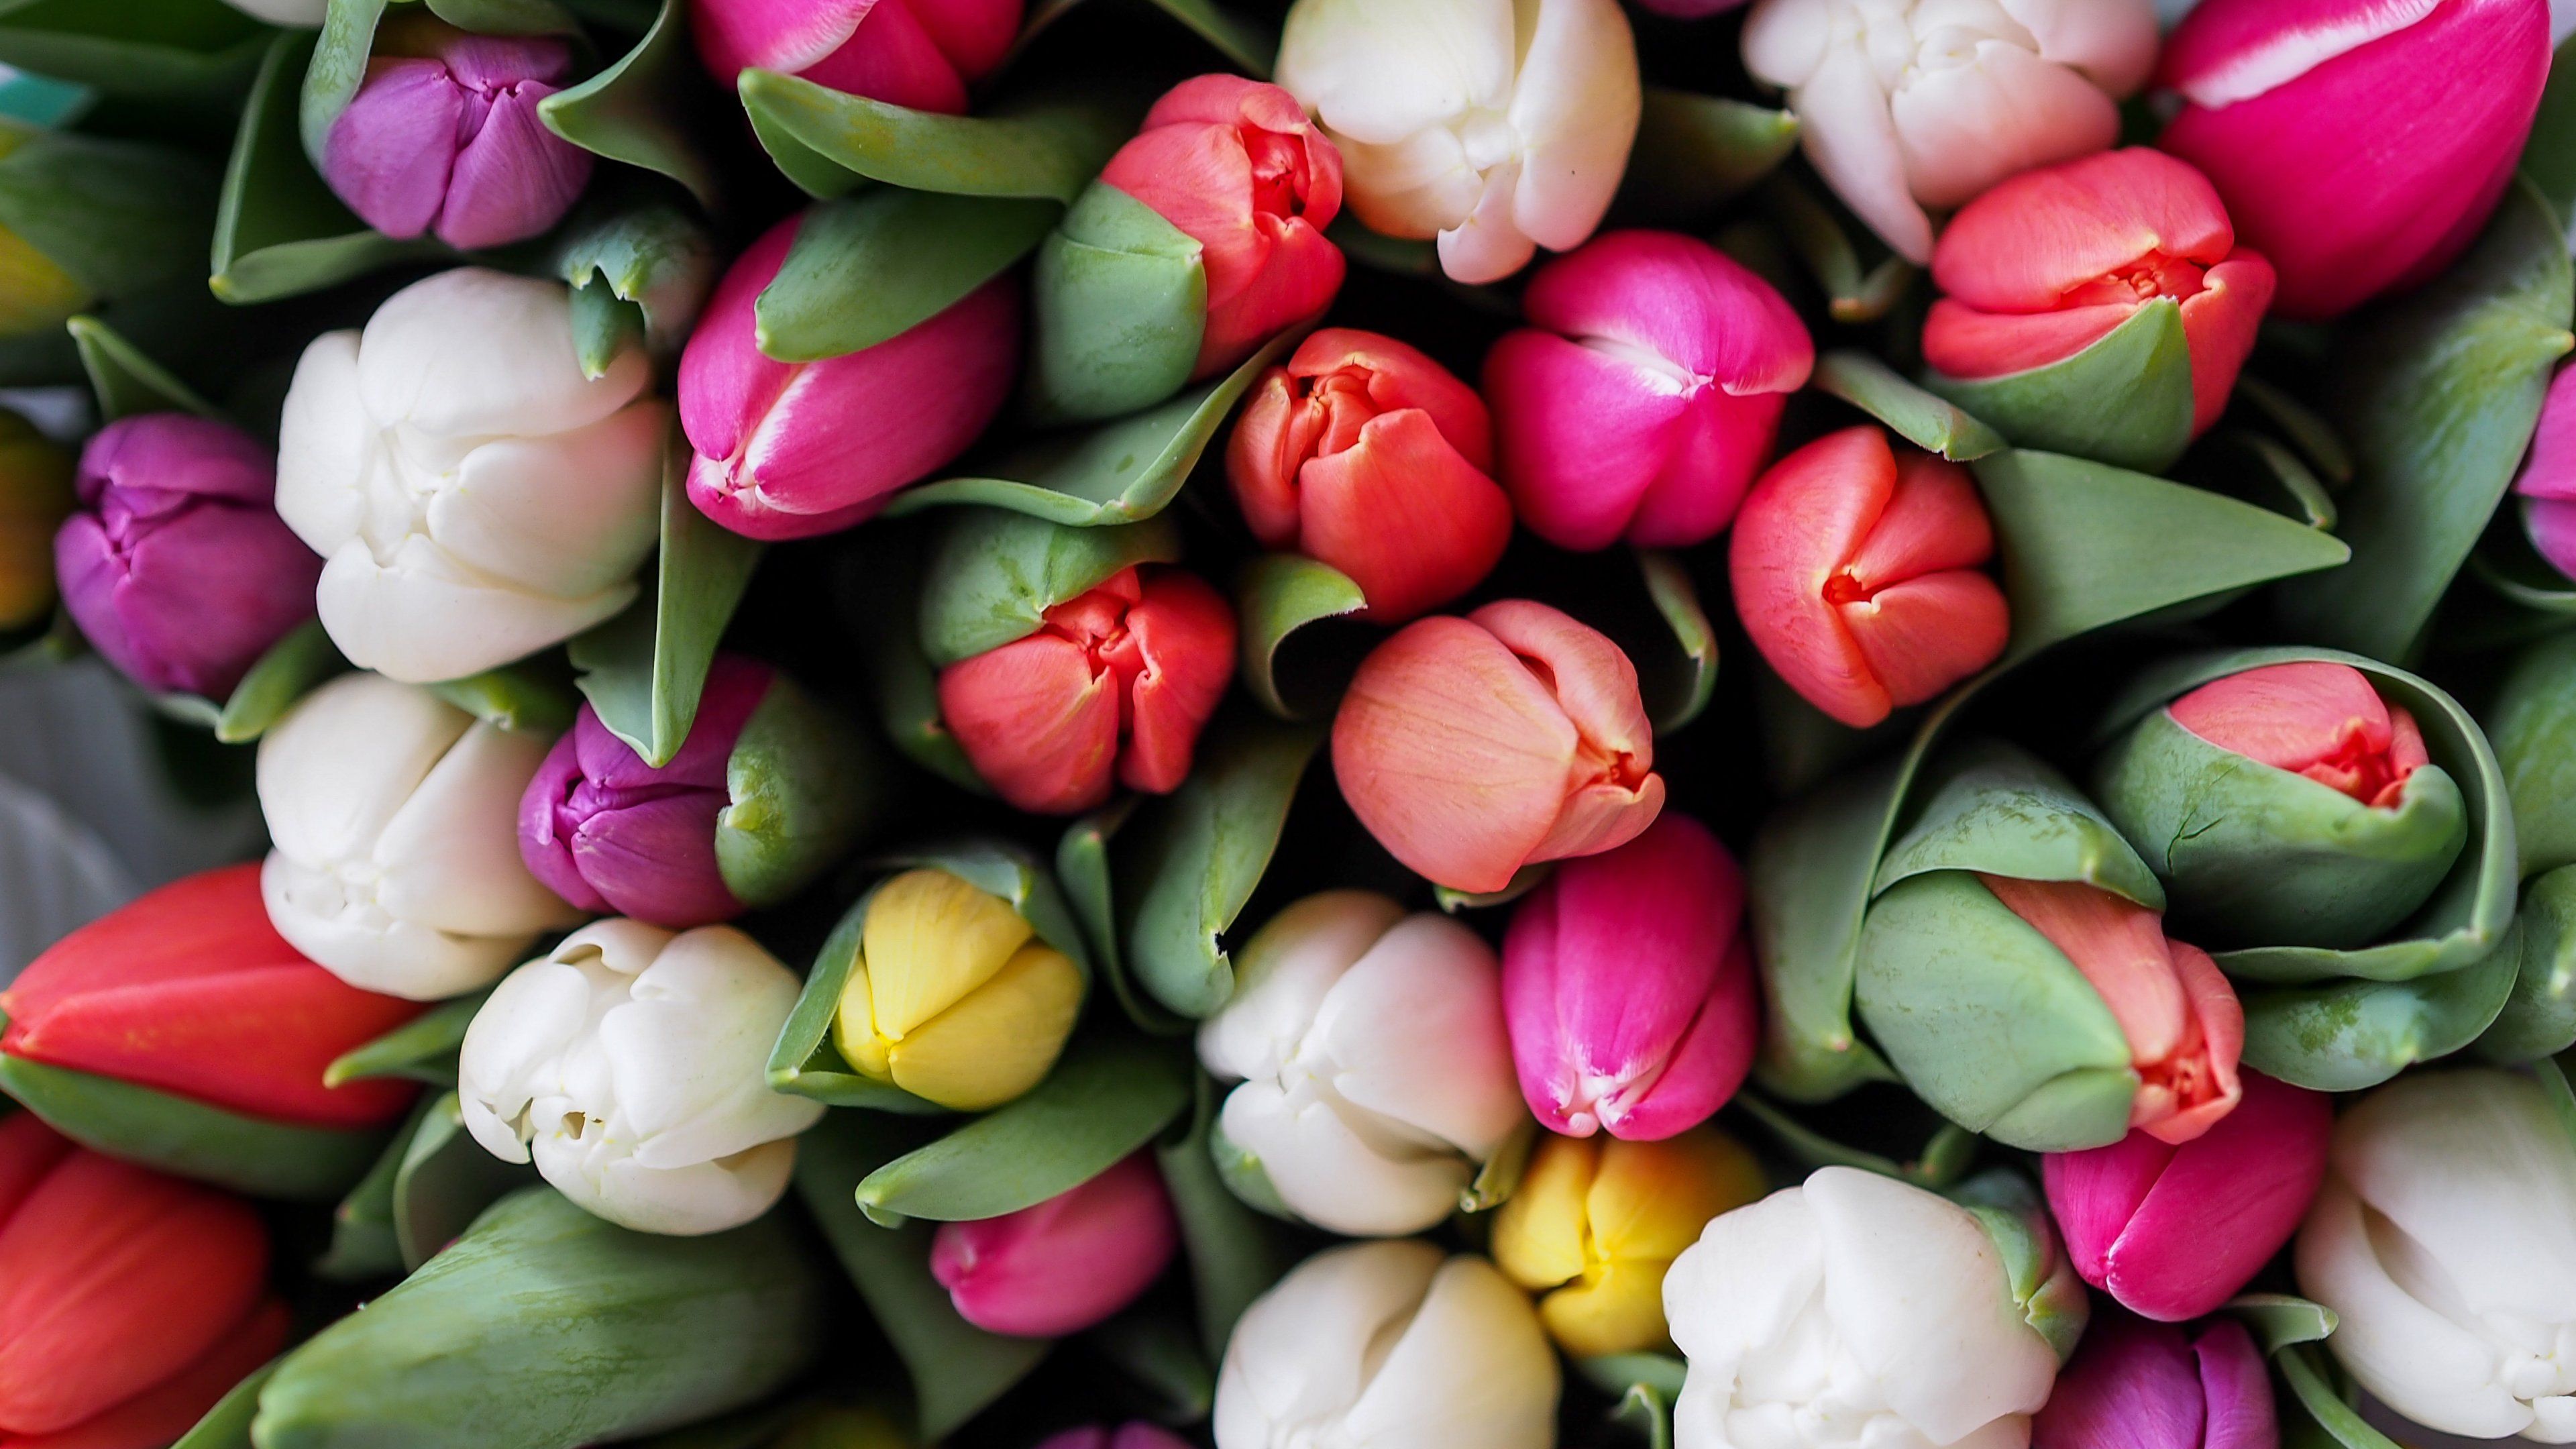 Colorful Tulips 4k Ultra HD Wallpaper. Background Image